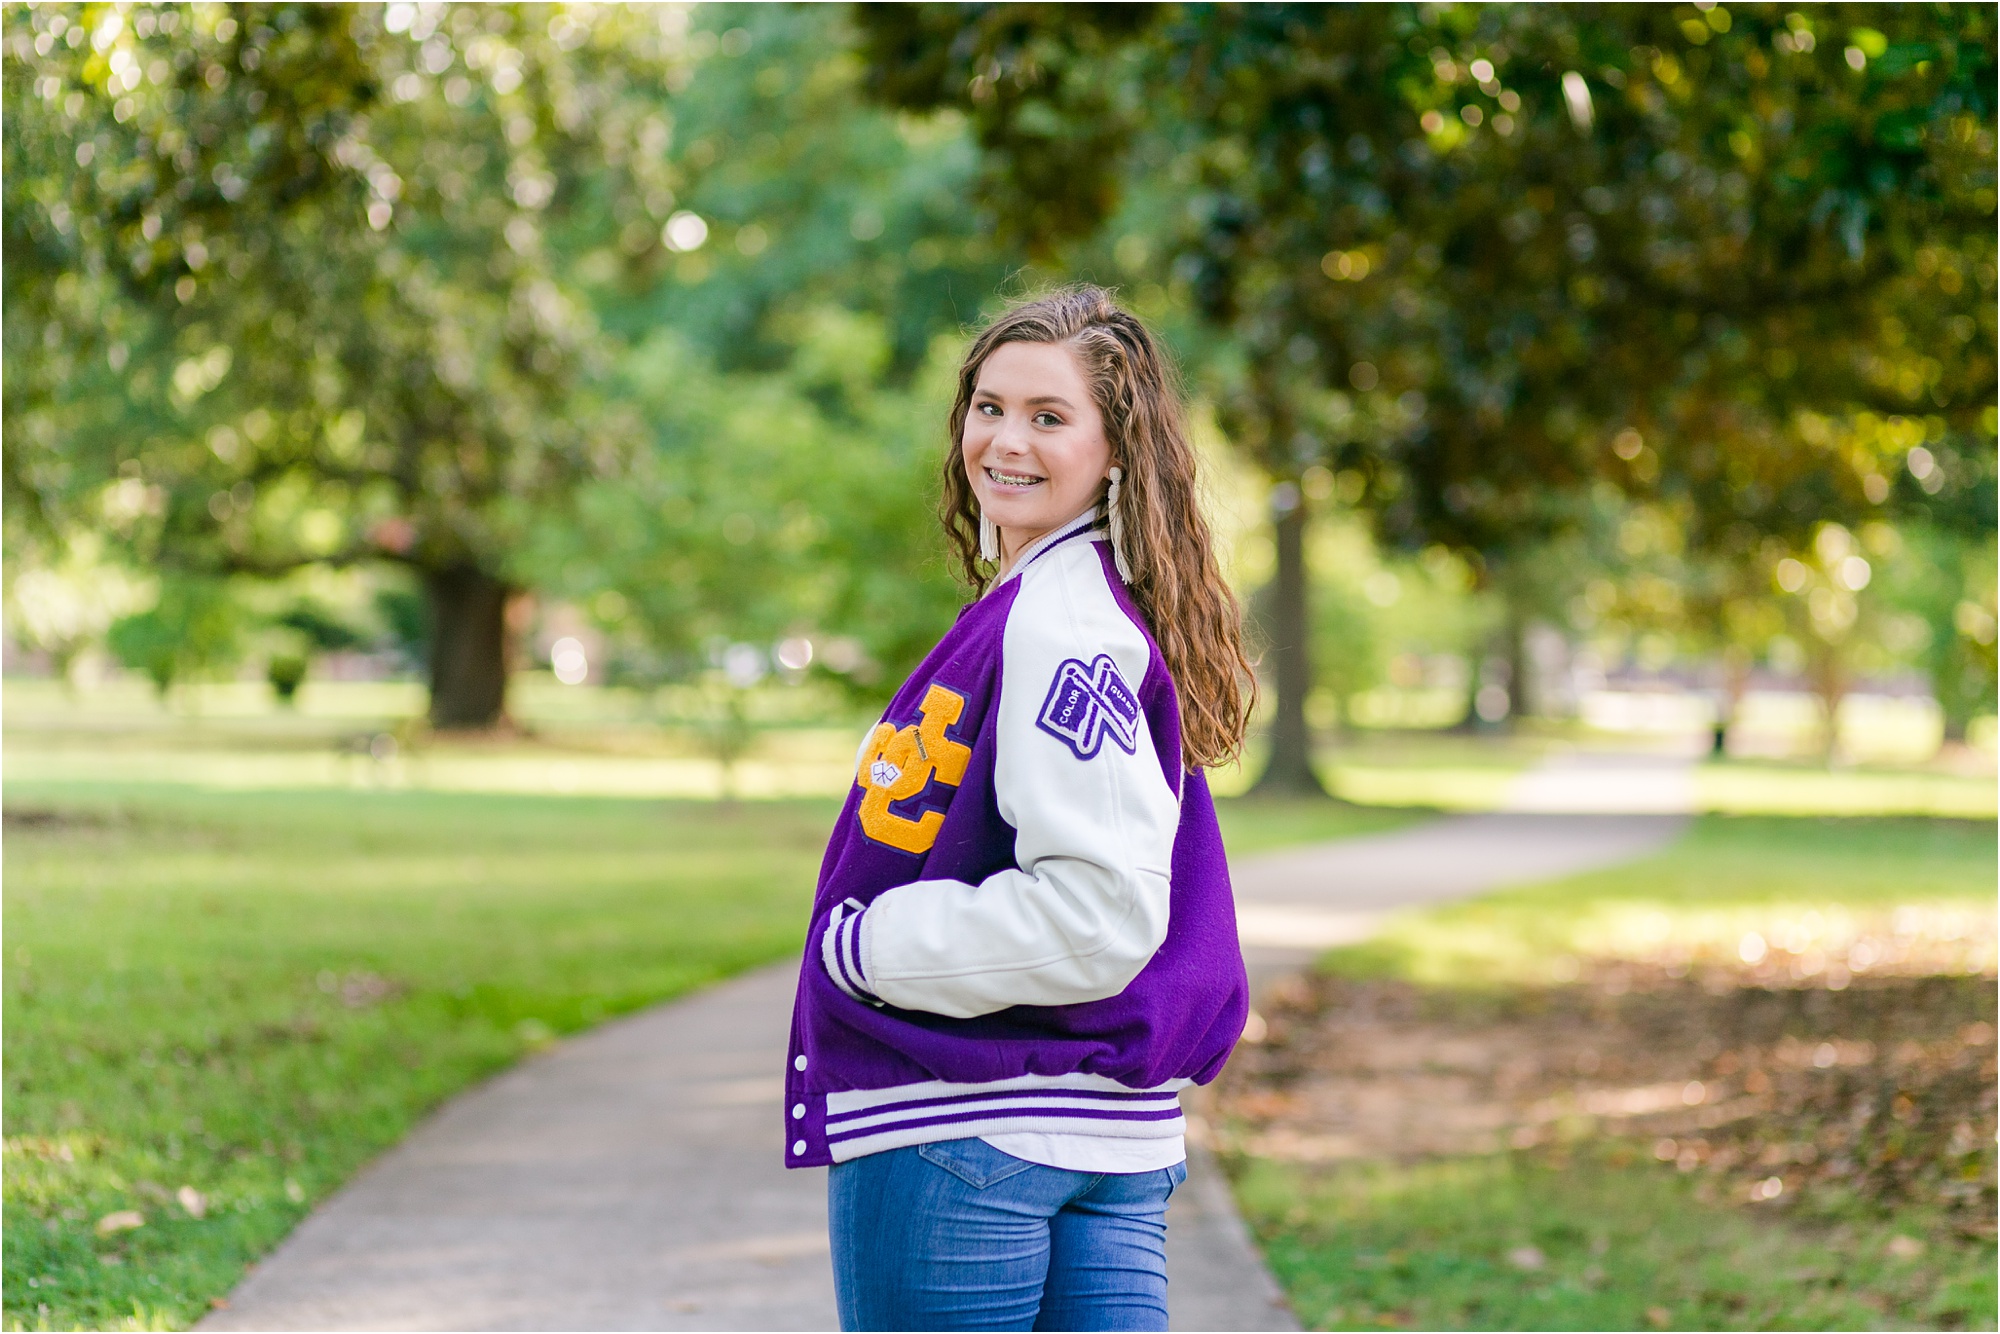 macon georgia class of 2020 senior in yellow shirt and jeans and letterman jacket